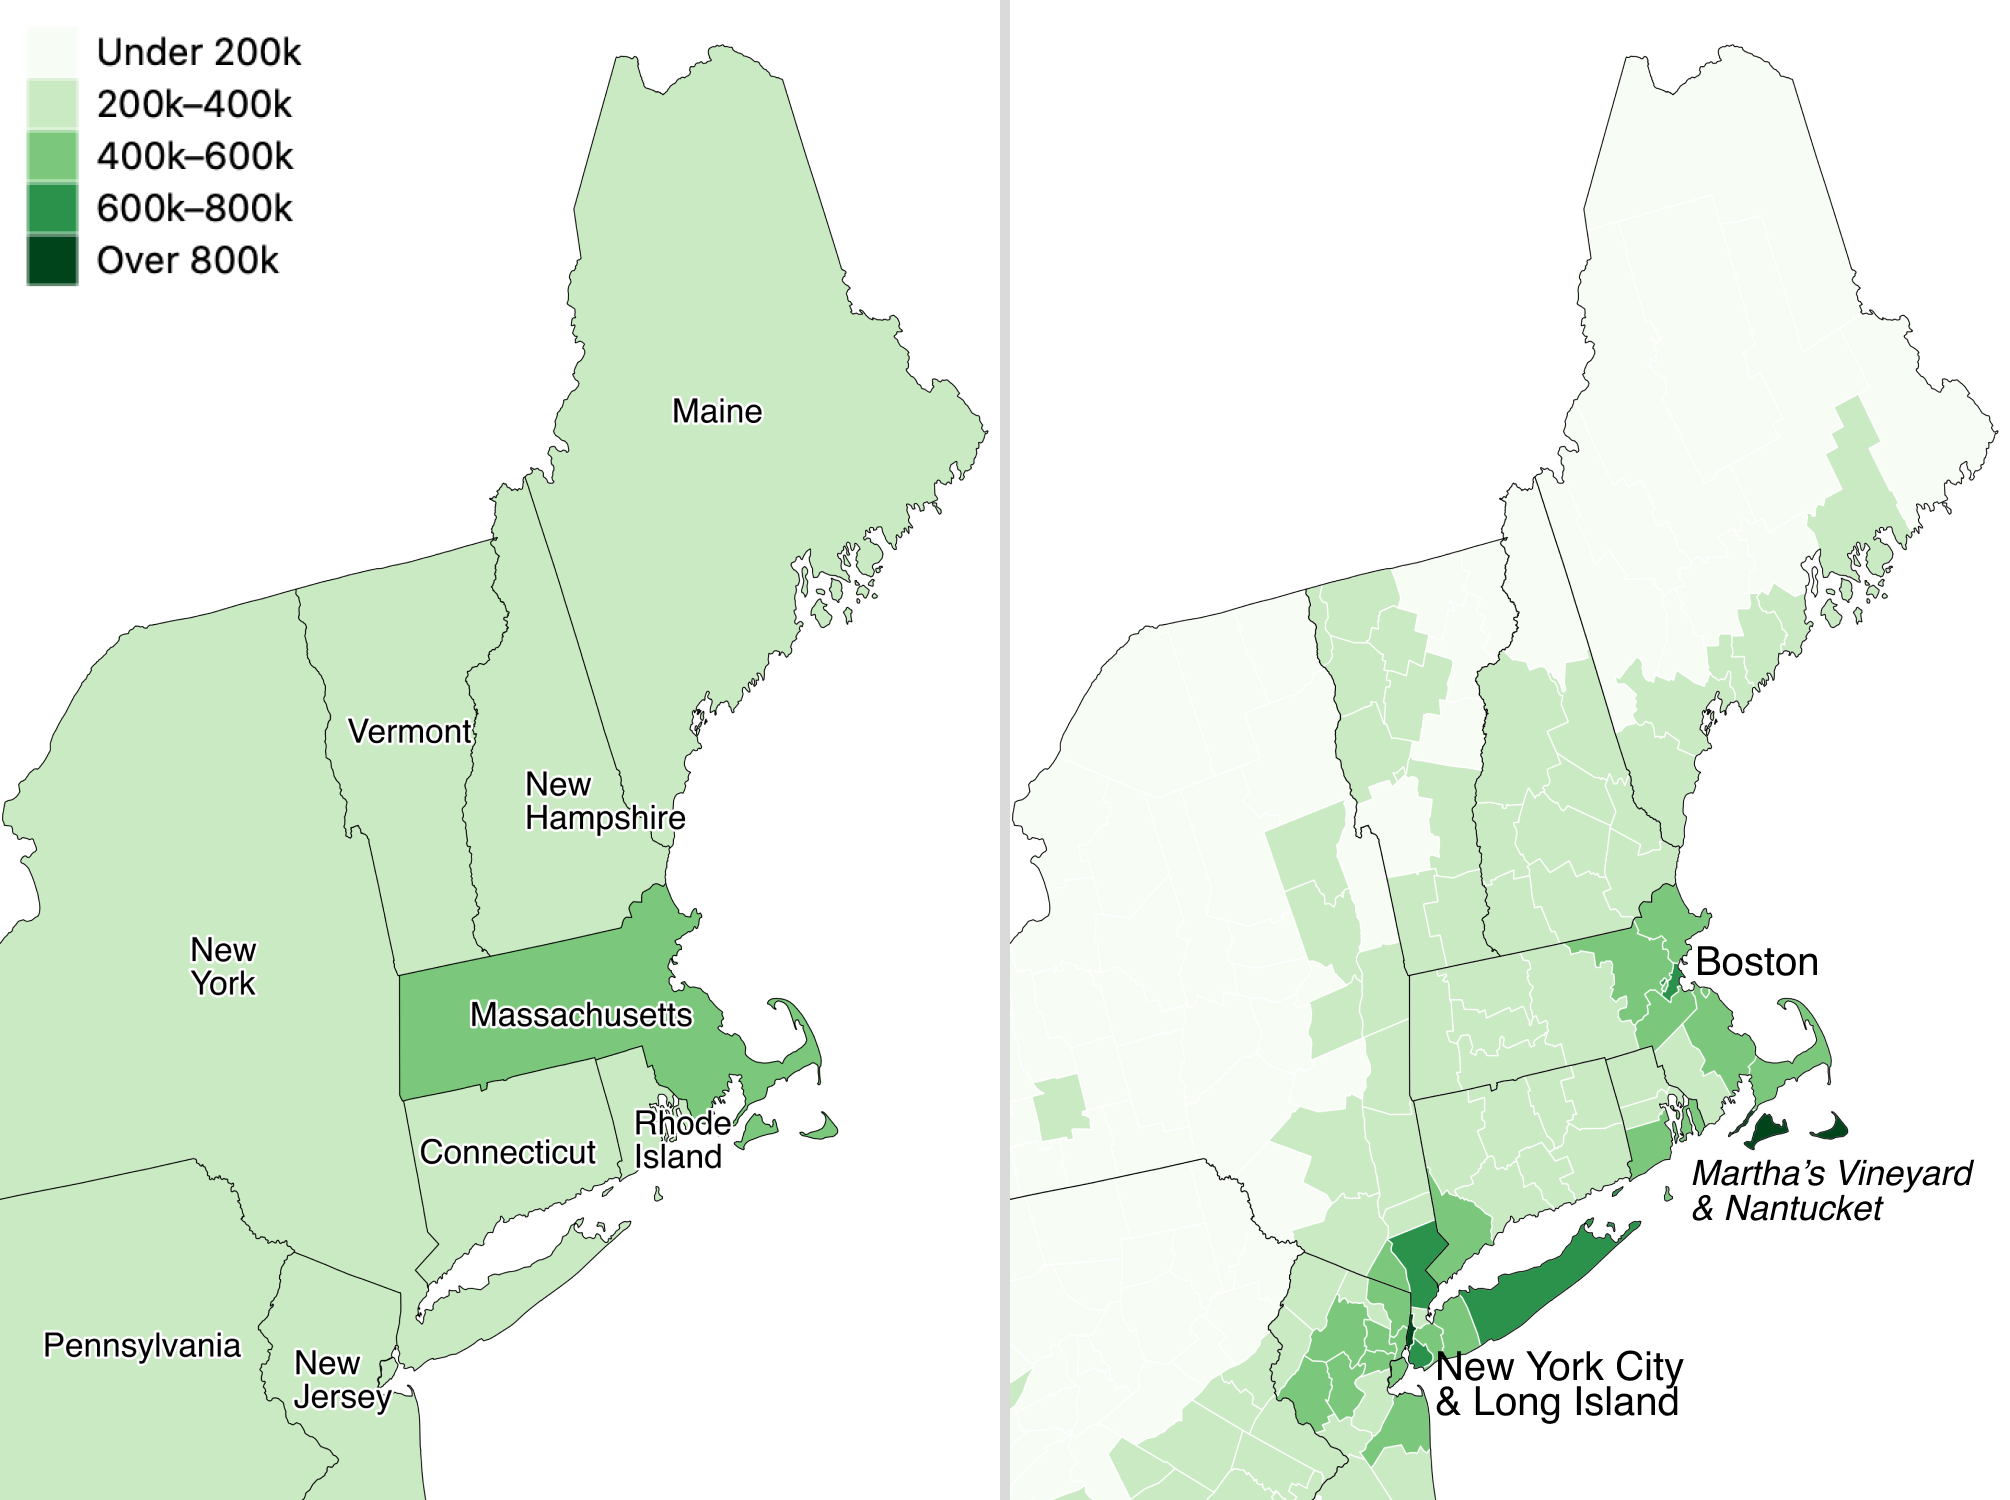 Zillow typical home values in September 2020 shown at the larger state level (left) versus the smaller county level (right).